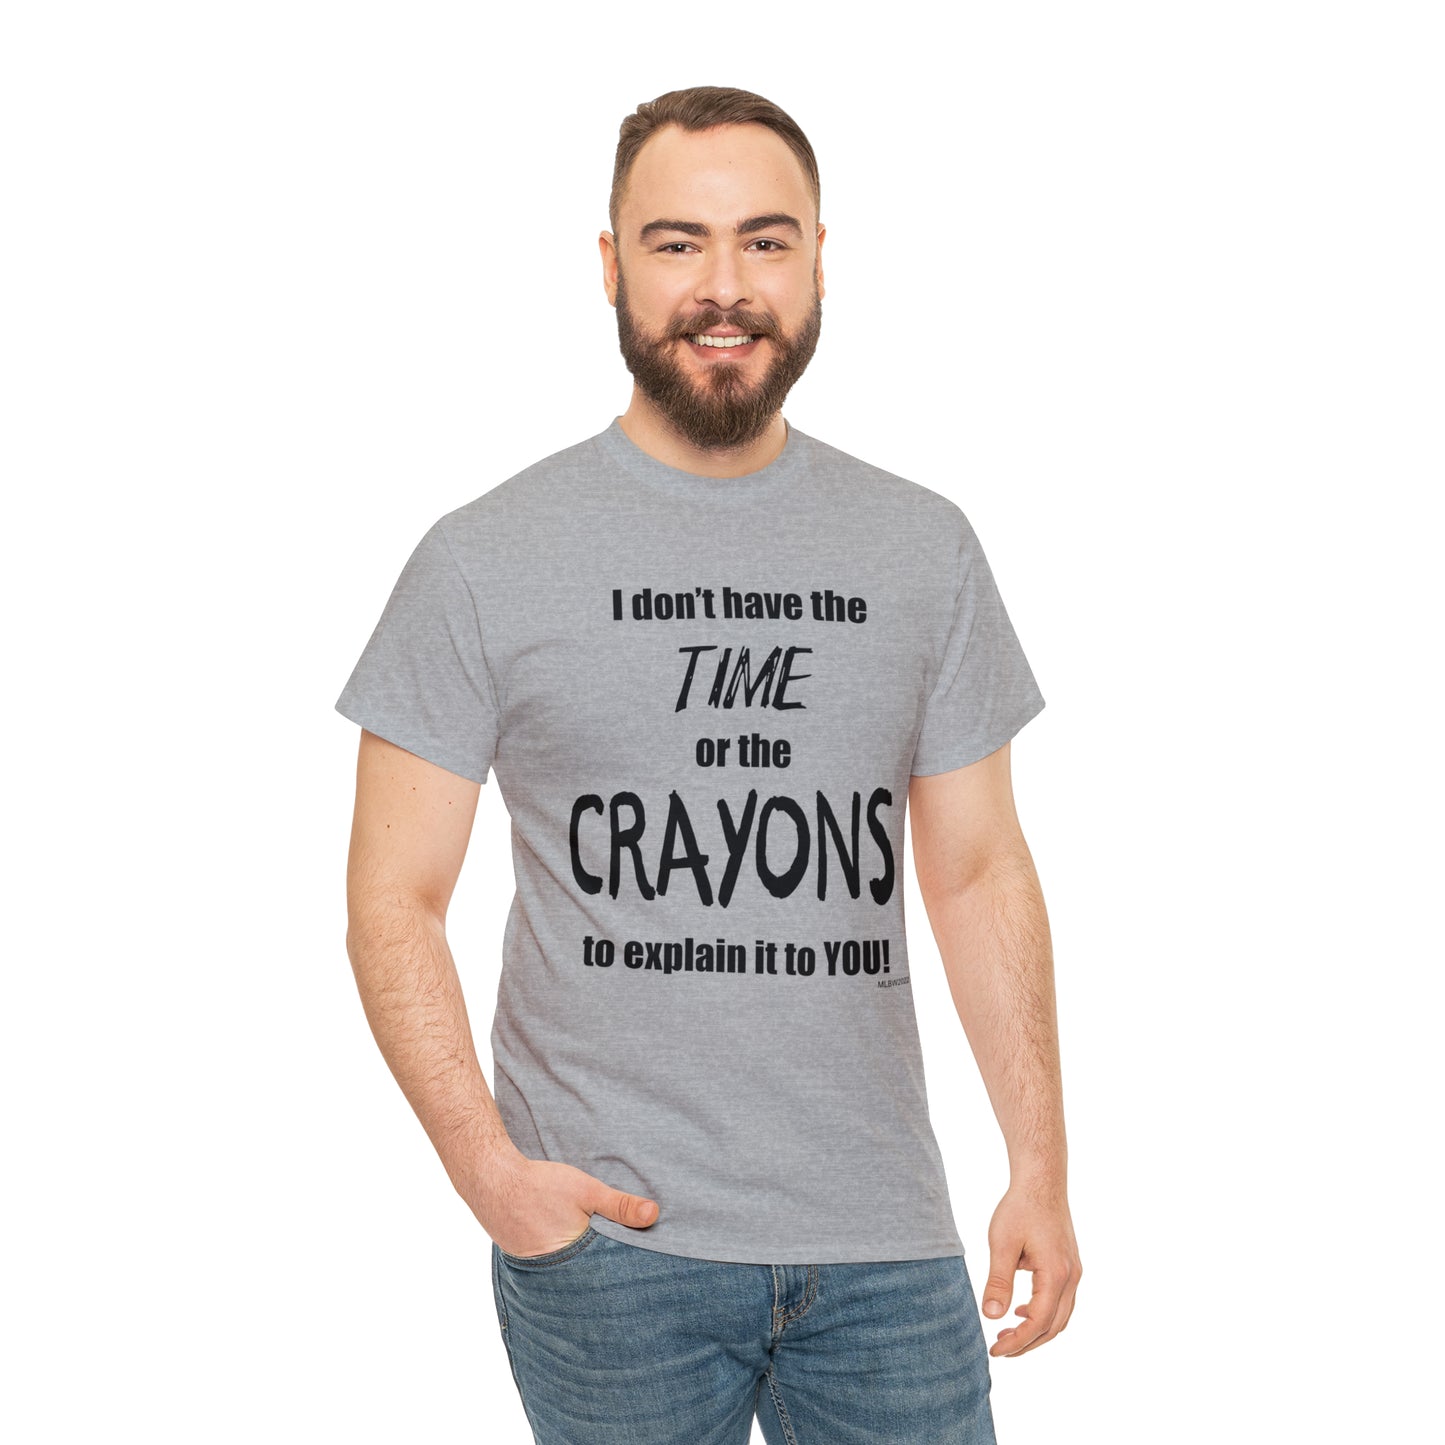 Don't have the TIME or the CRAYONS - Unisex Heavy Cotton Tee (BLACK TEXT) - EU